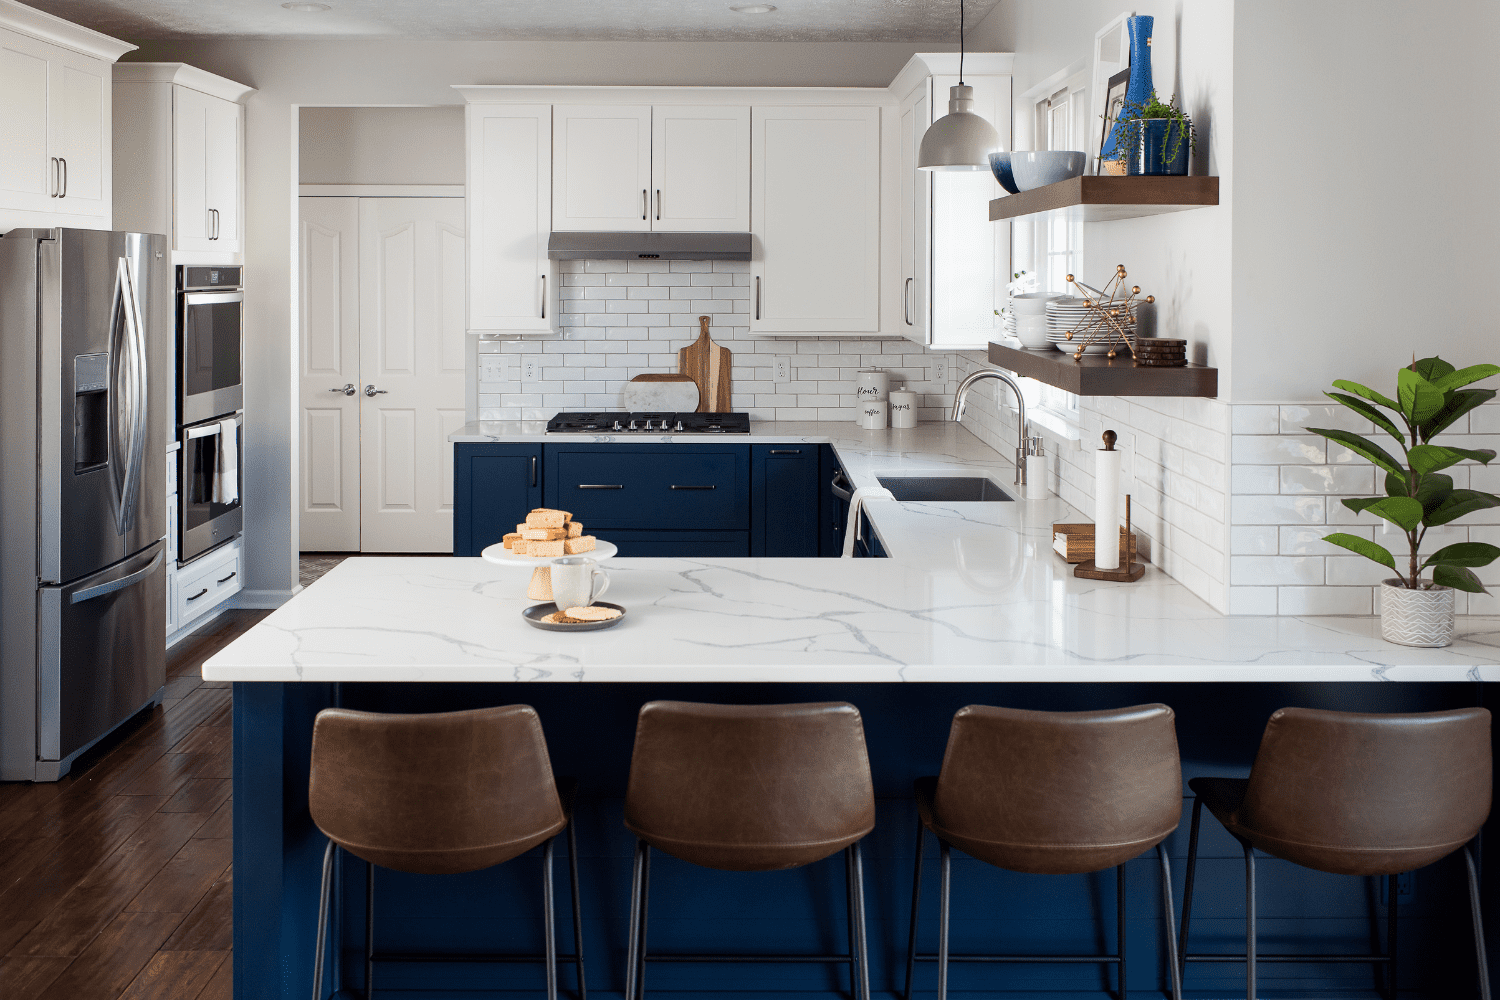 Nicholas Design Build | A blue and white kitchen with brown stools.